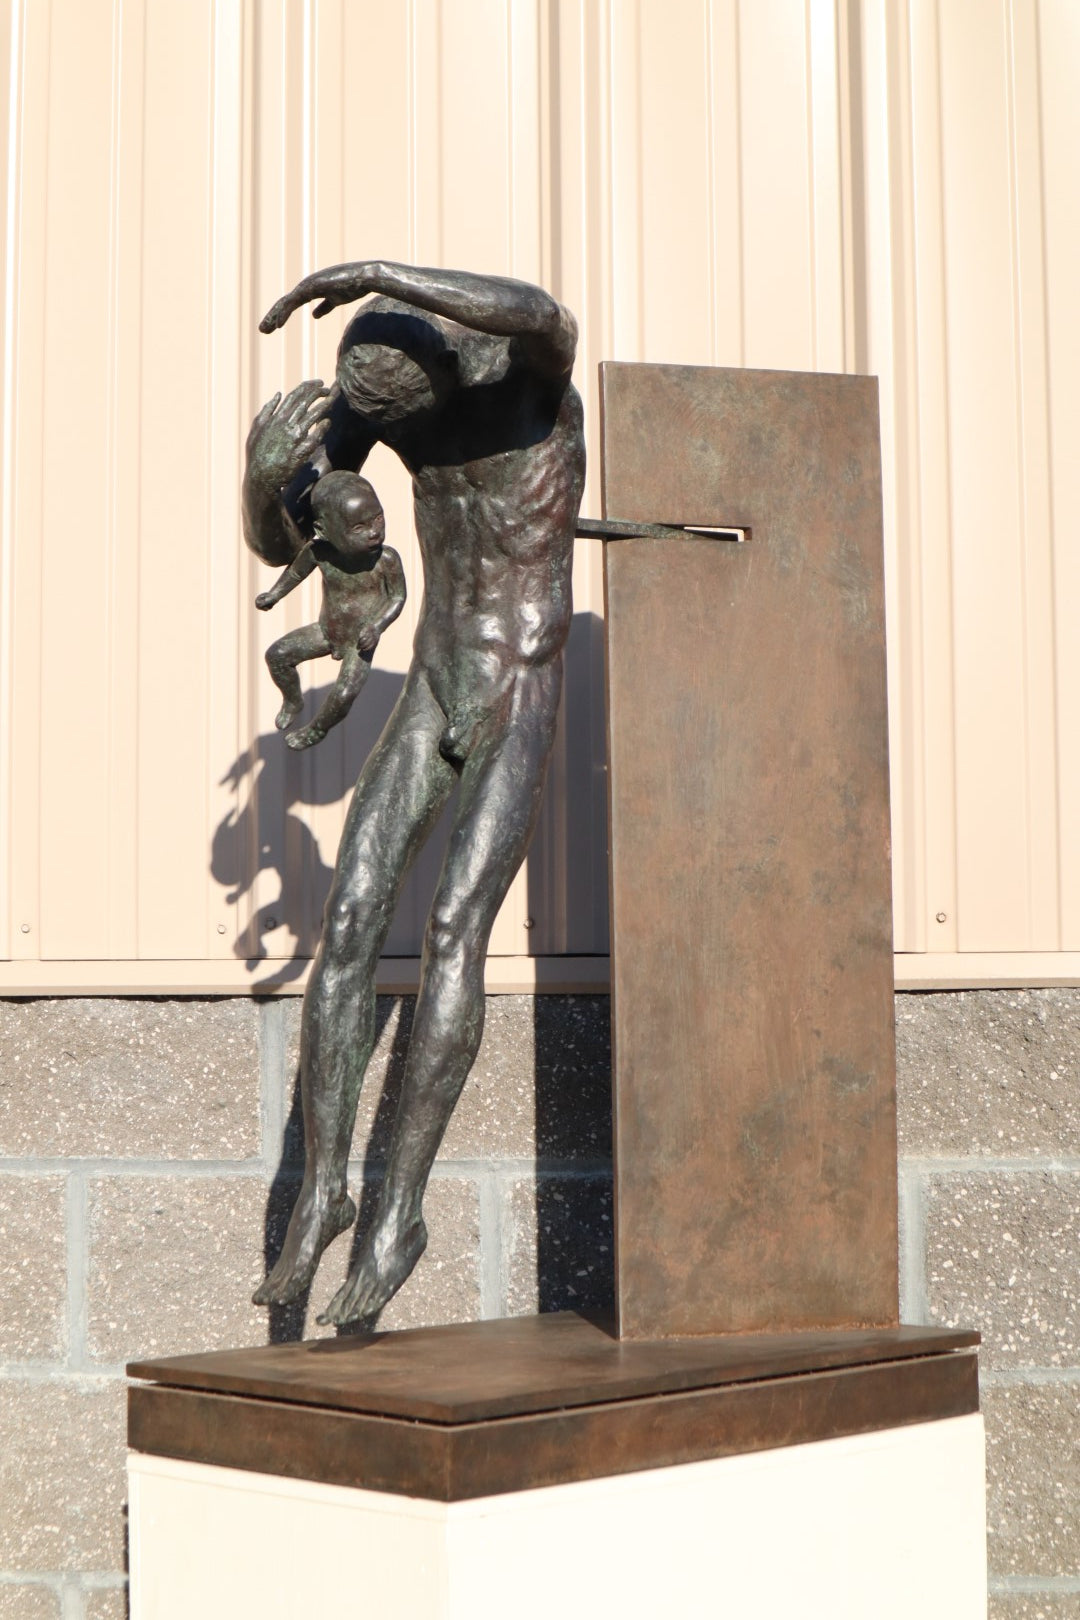 TREVOR SOUTHEY BRONZE SCULPTURE, "FATHERHOOD", DEPICTION OF MAN WITH INFANT, BRONZE AND STEEL, WITH BASE